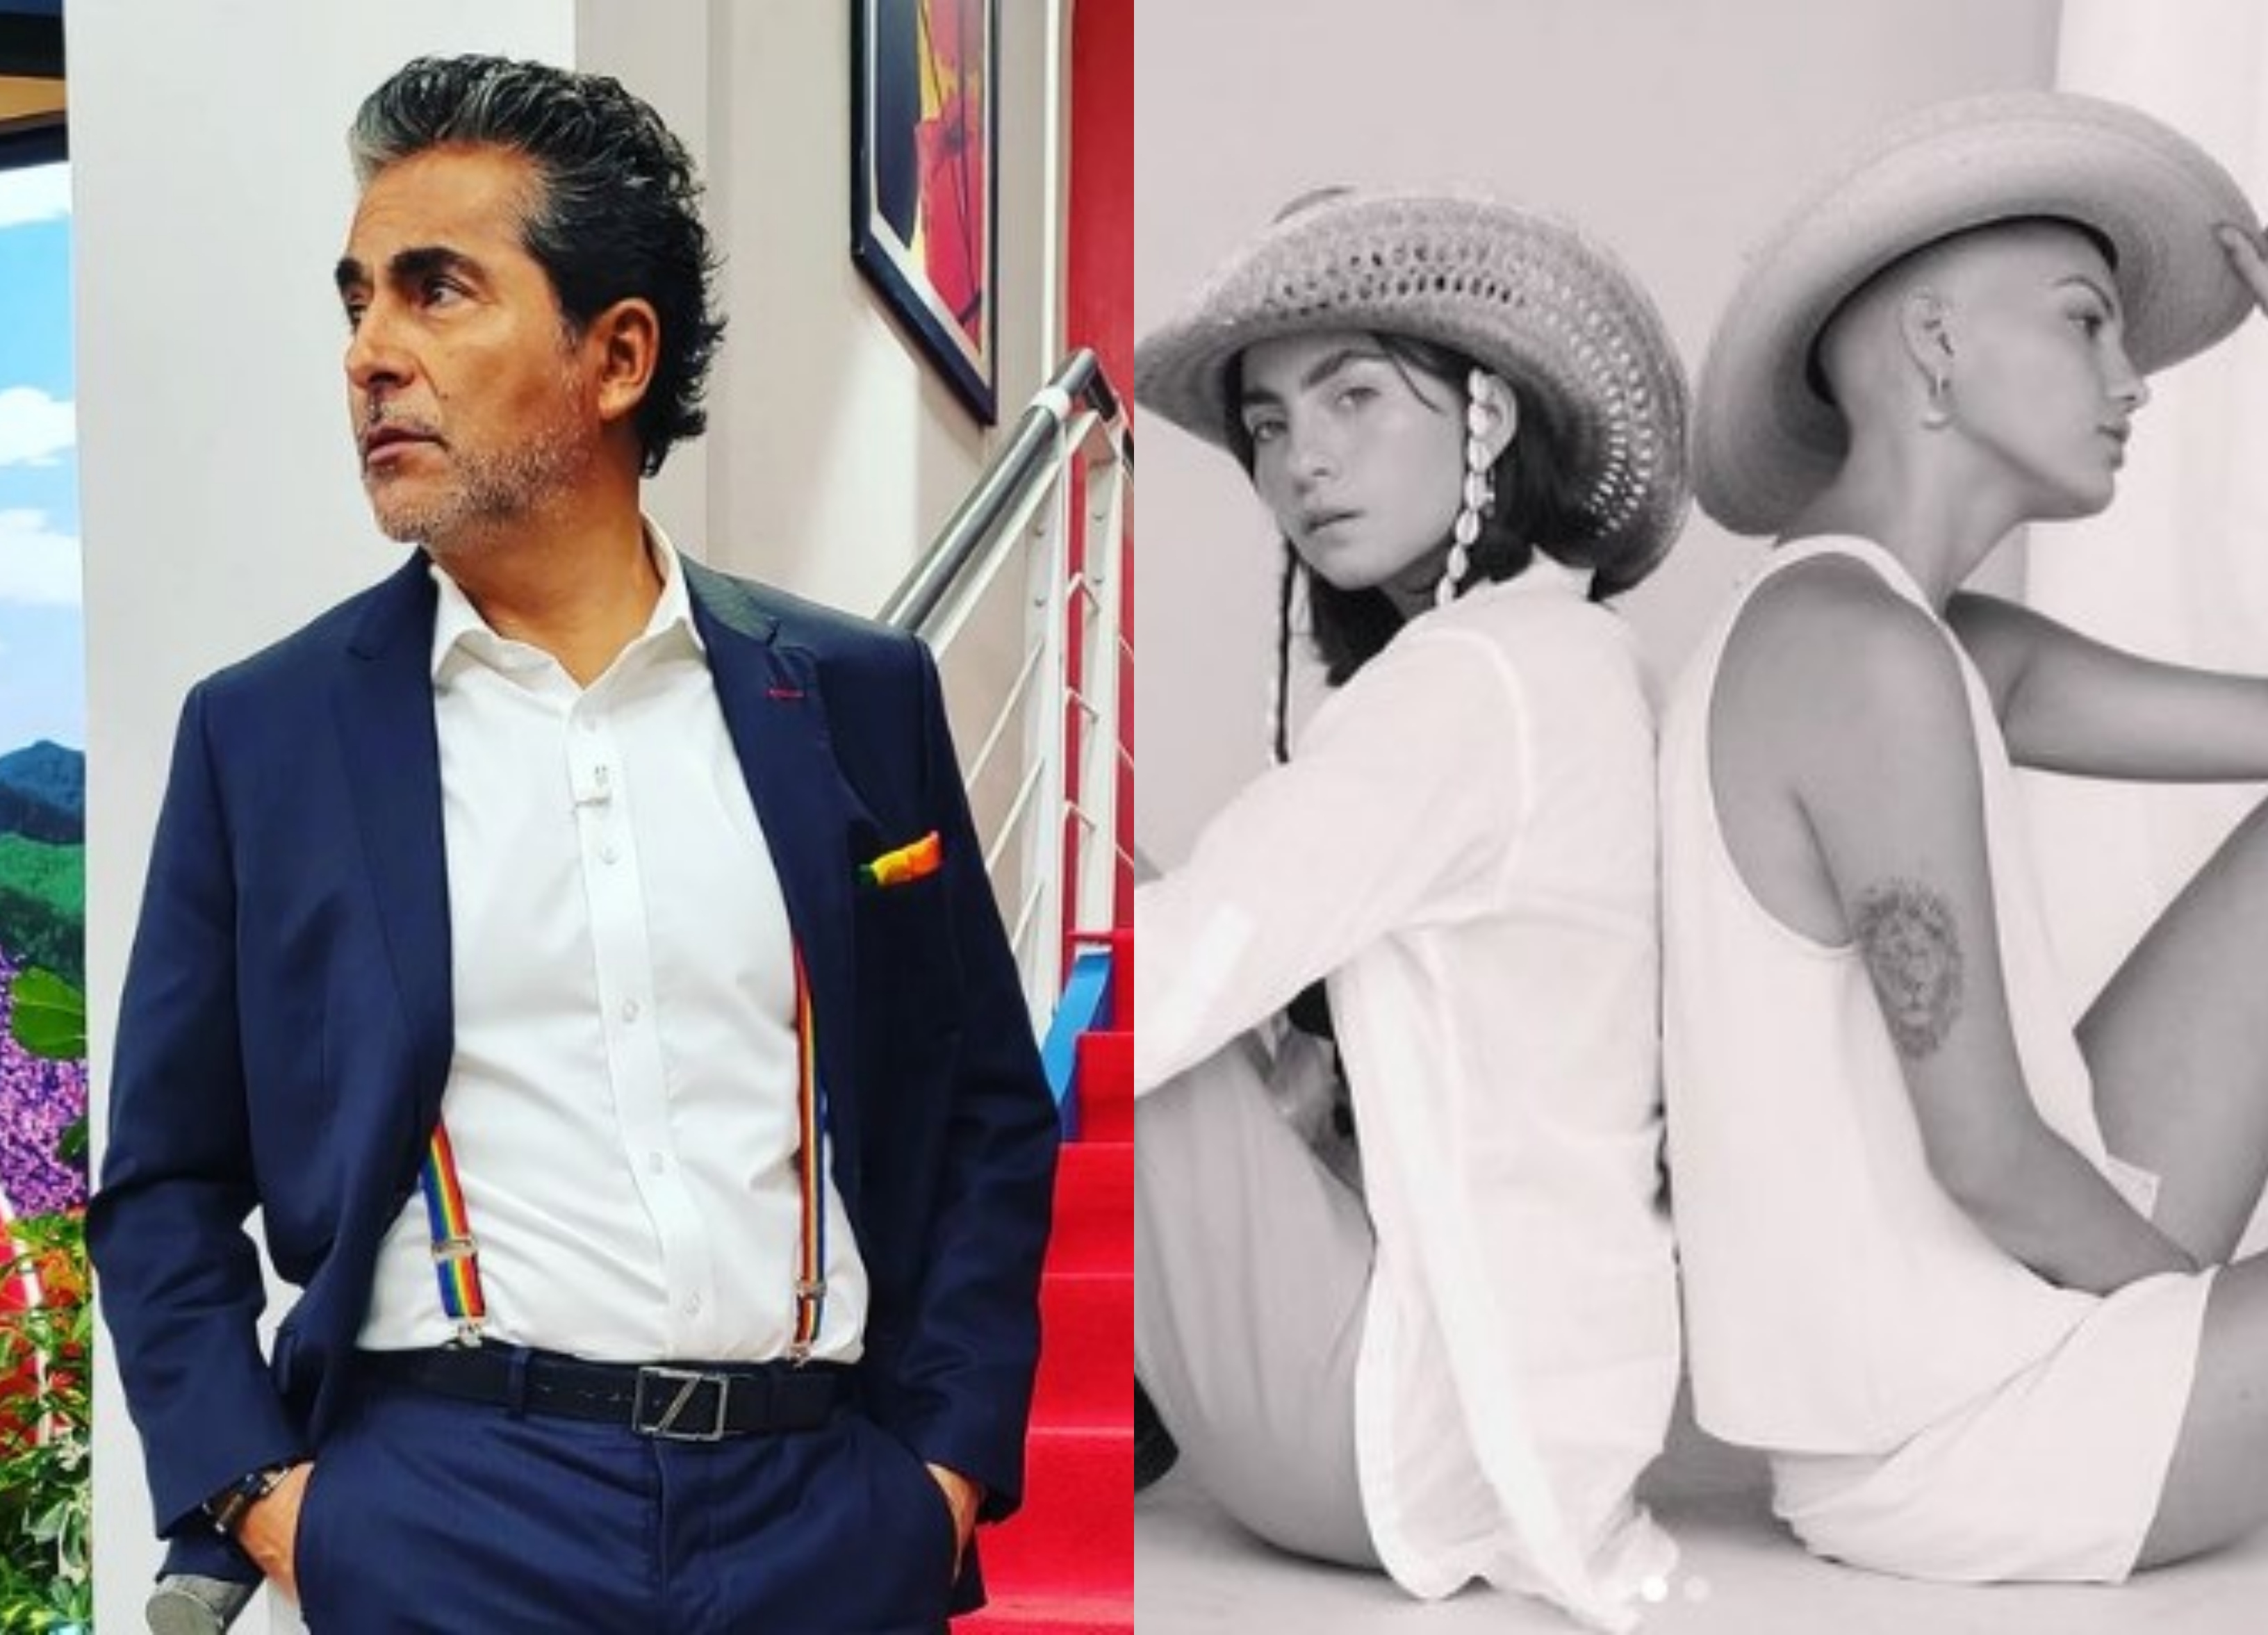 Raúl Araiza showed his full support for his daughter, who published a liberating message (Photo: Instagram)